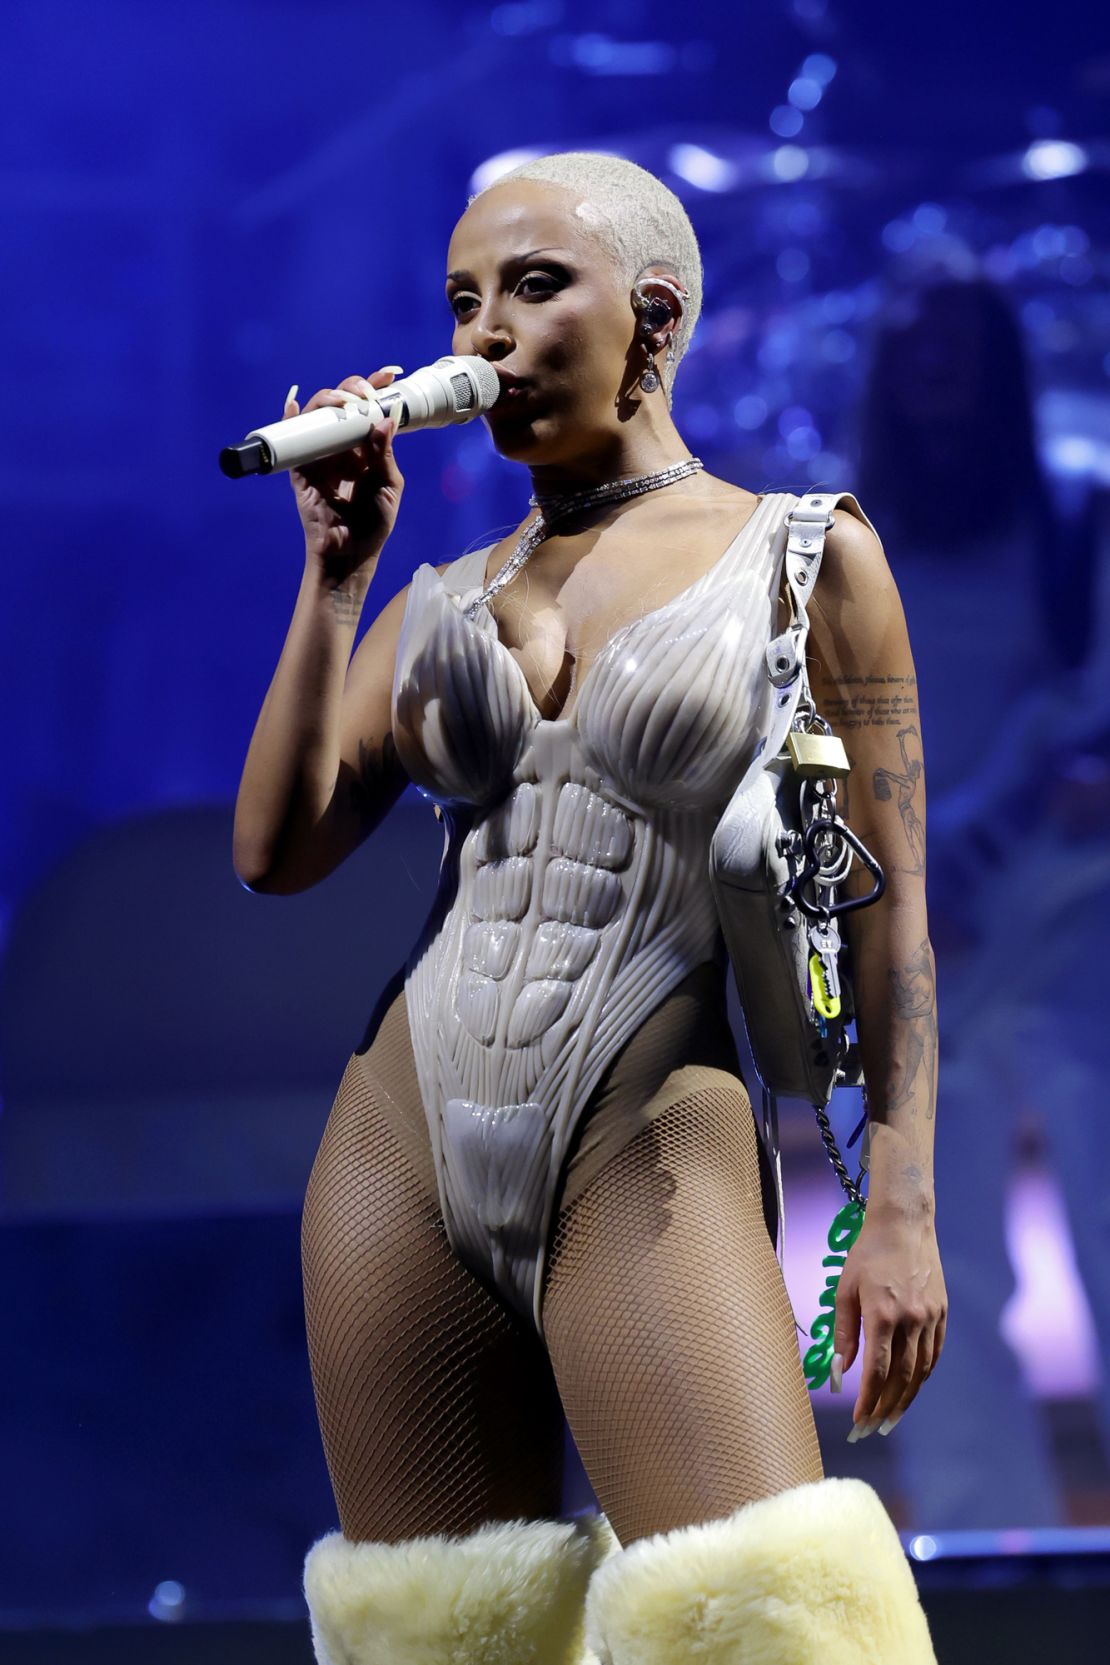 During a costume change in the middle of her set on the second weekend, Doja Cat wore a custom Asher Levine muscular bodysuit and furry over-the-knee boots.